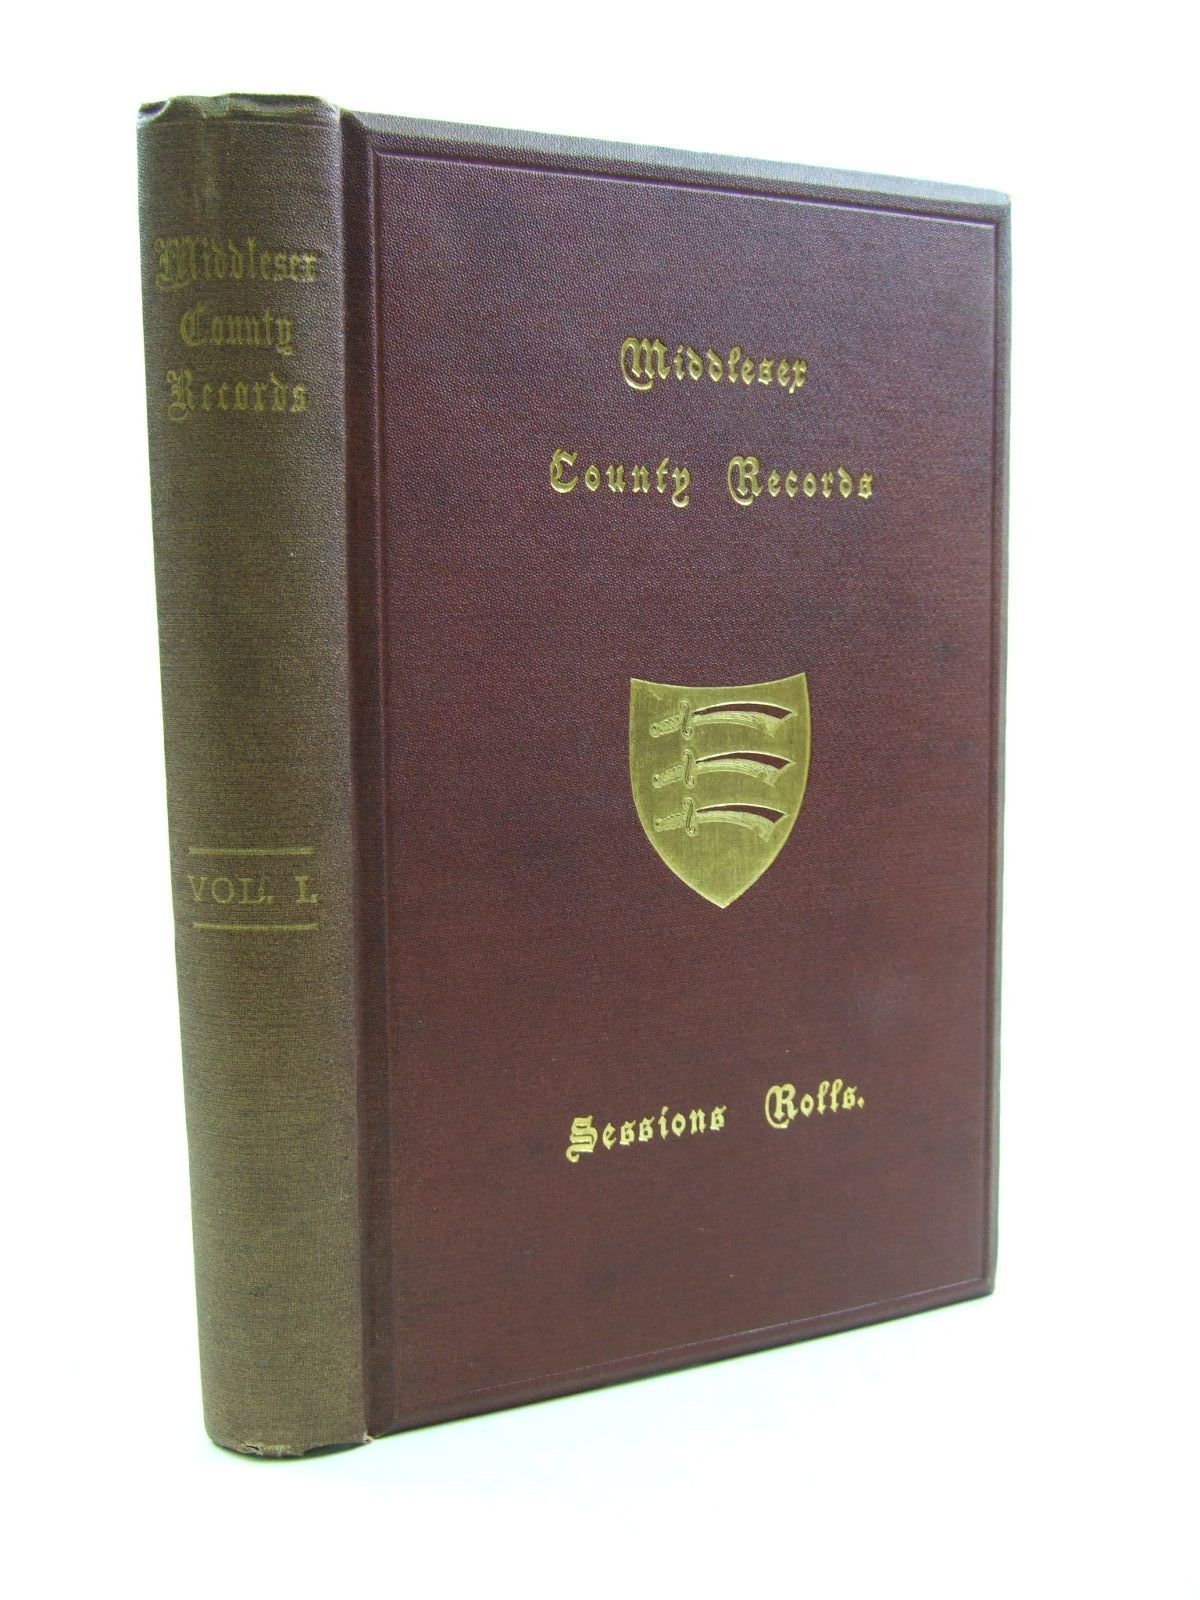 Photo of MIDDLESEX COUNTY RECORDS VOLUME I written by Jeaffreson, J.C. published by The Middlesex County Record Society (STOCK CODE: 1207504)  for sale by Stella & Rose's Books